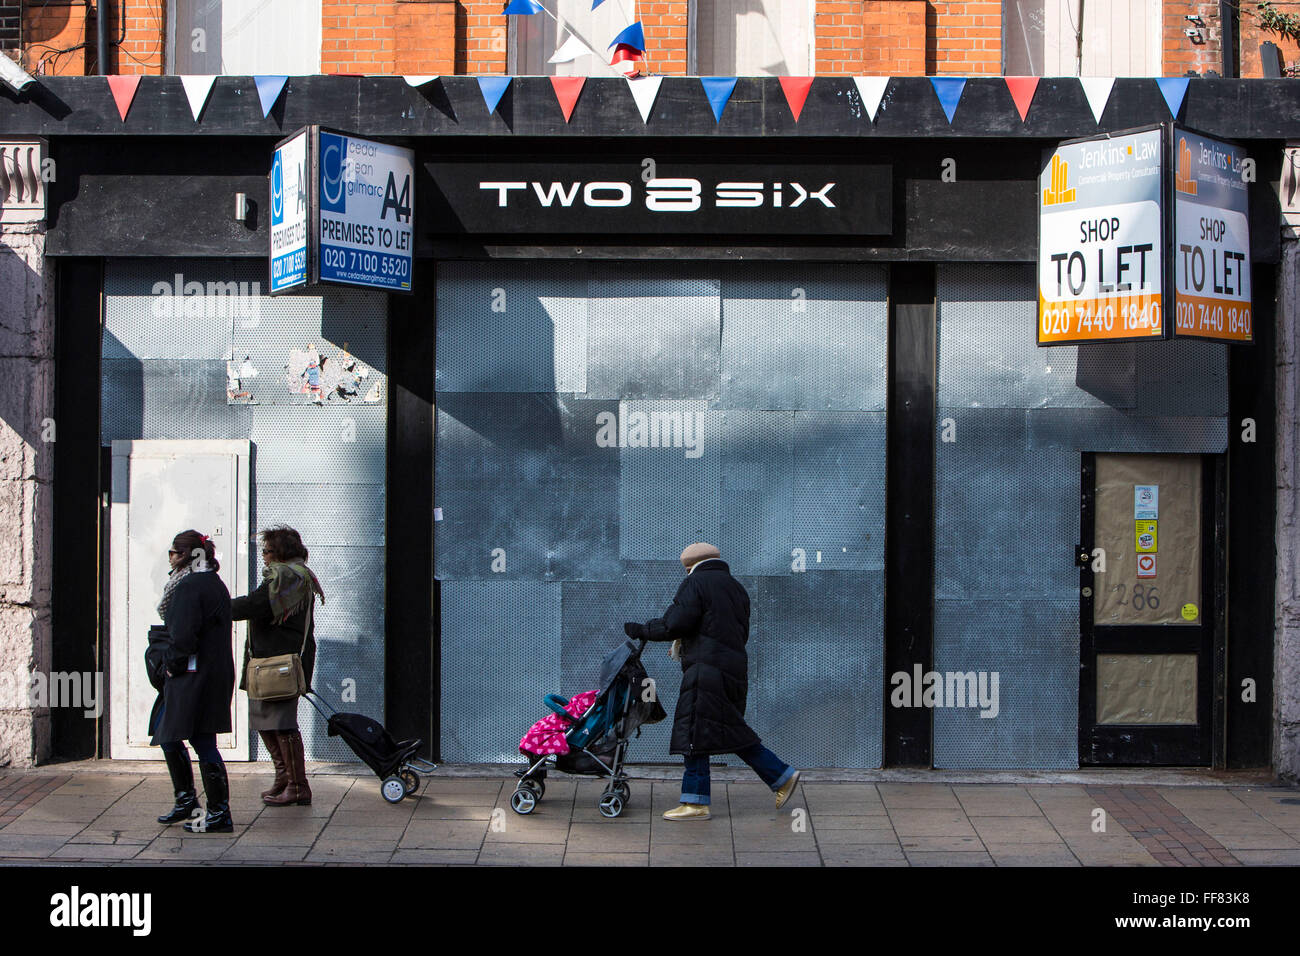 A woman with a push-chair walks past a derelict high-street shop, Lewisham, London, United Kingdom.  Many retail stores have closed down during the financial slow-down in Britain. Stock Photo